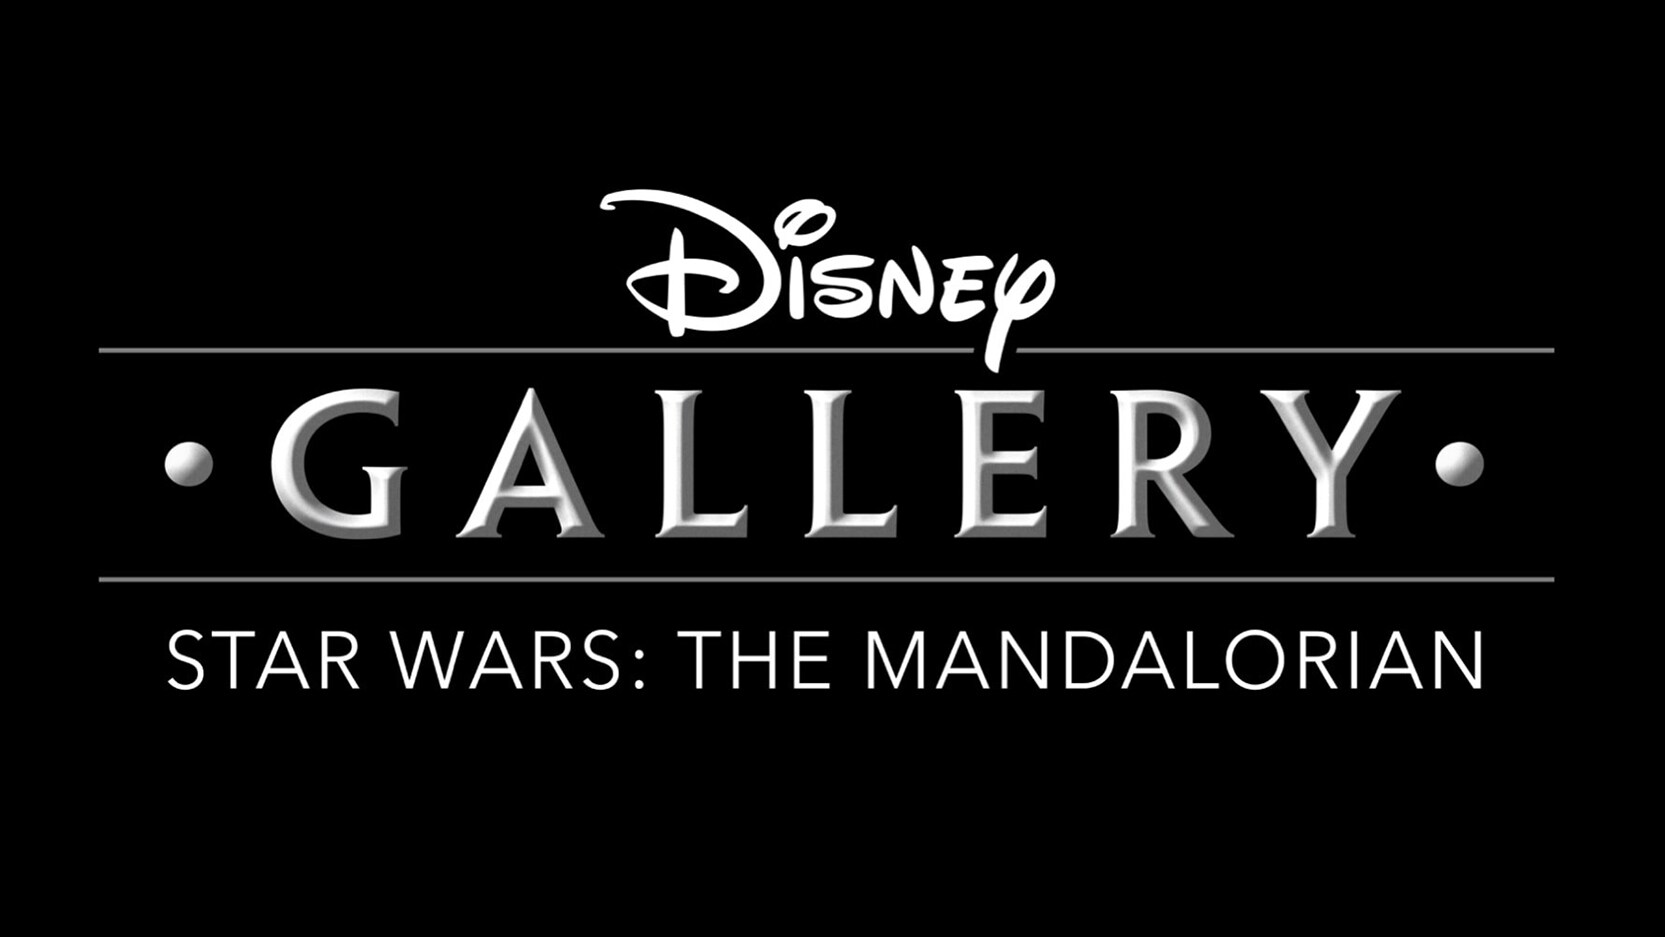 Go Behind the Scenes of the Transformative Second Season of “The Mandalorian” in “Disney Gallery: The Mandalorian”